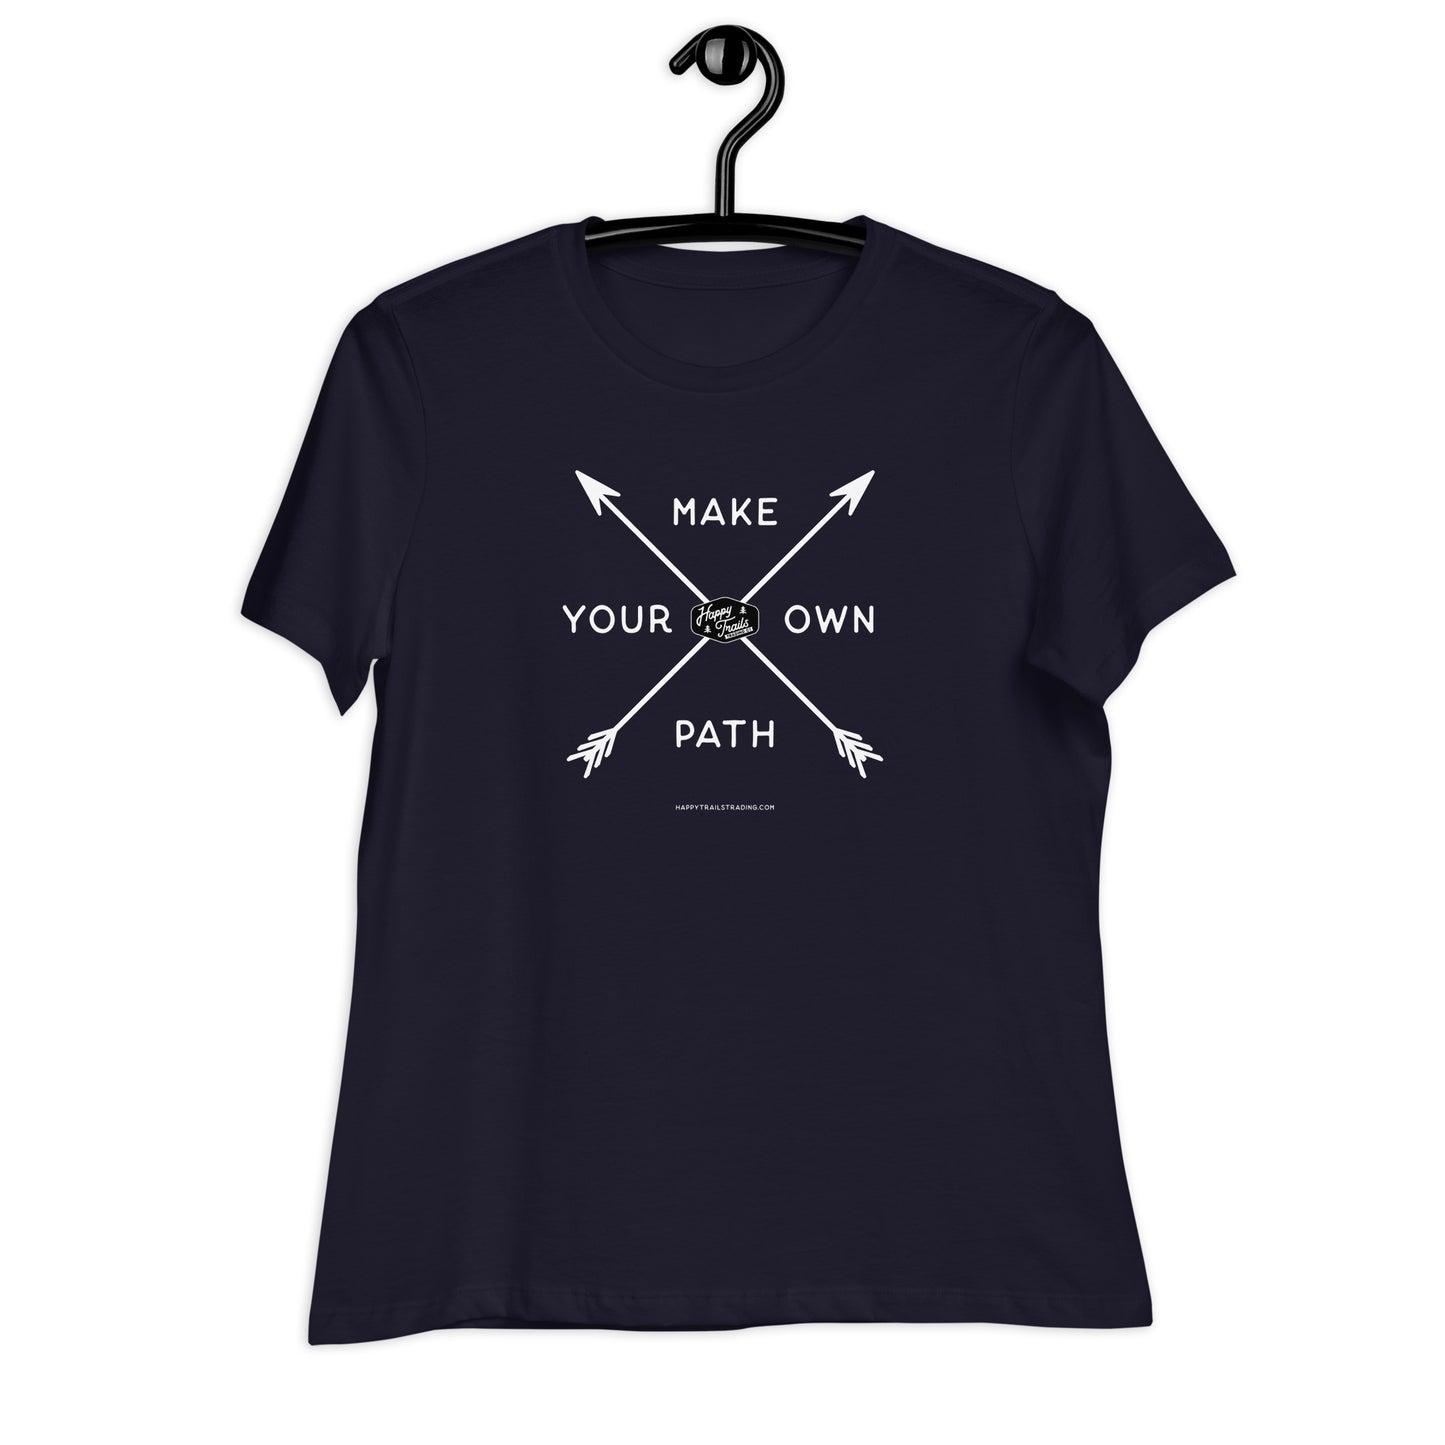 Make Your Own Path - Women's Relaxed T-Shirt